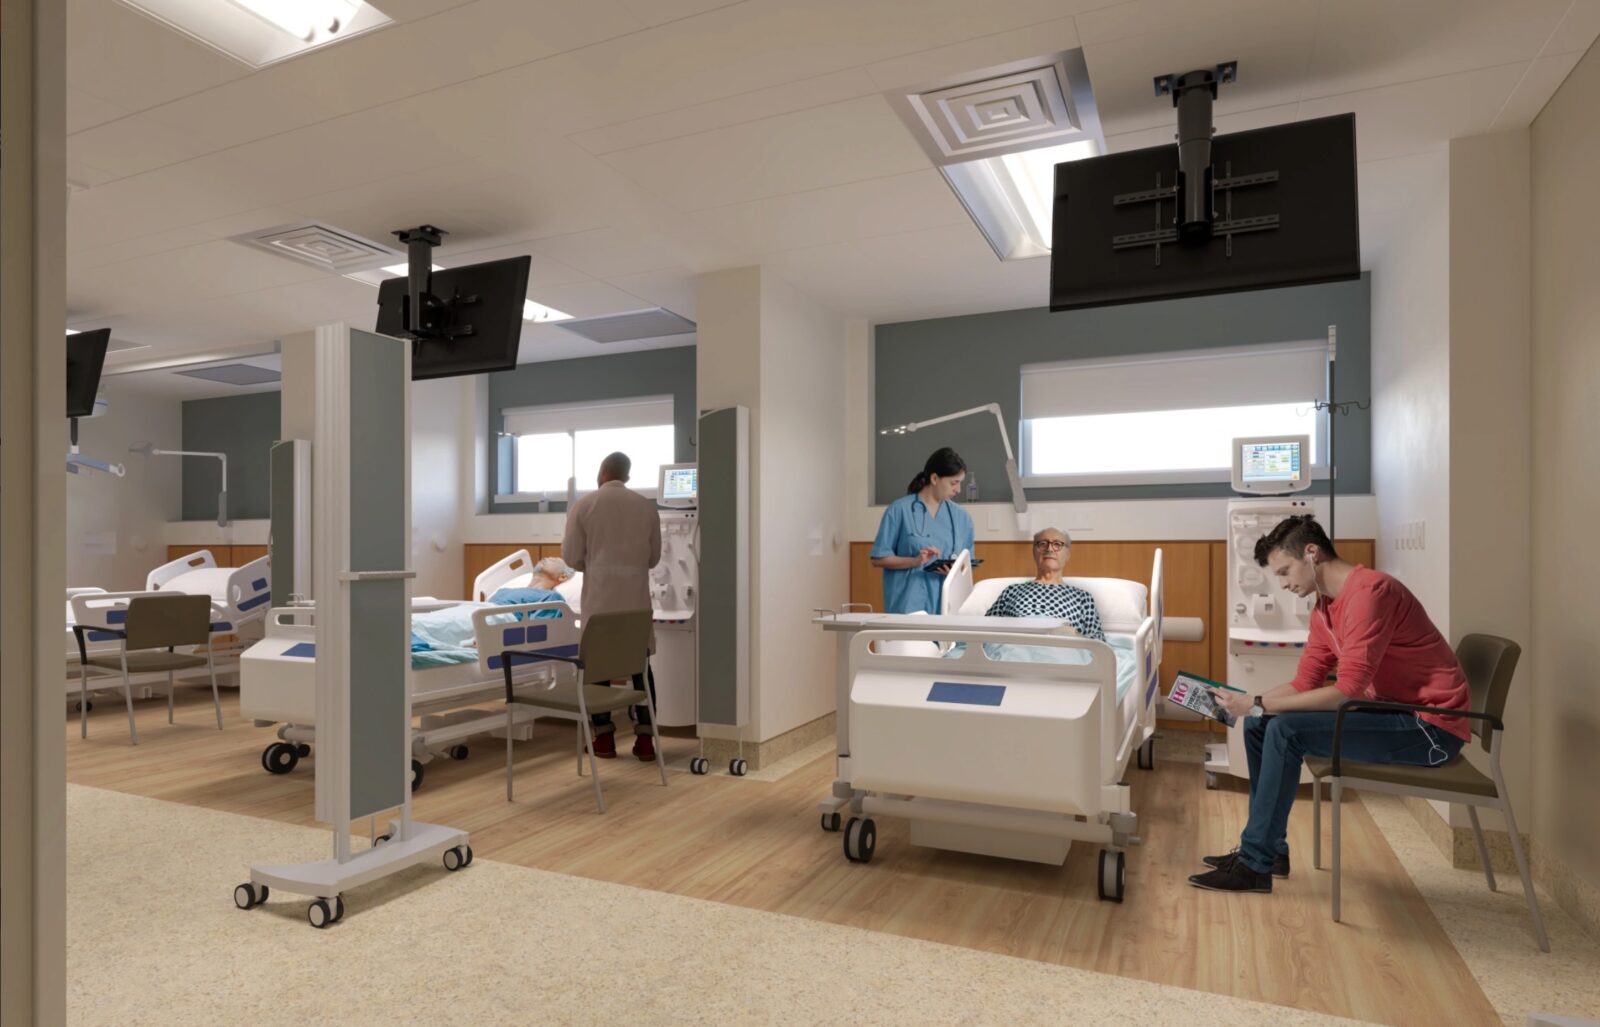 A rendering shows a renal unit project in Steinbach, Man.